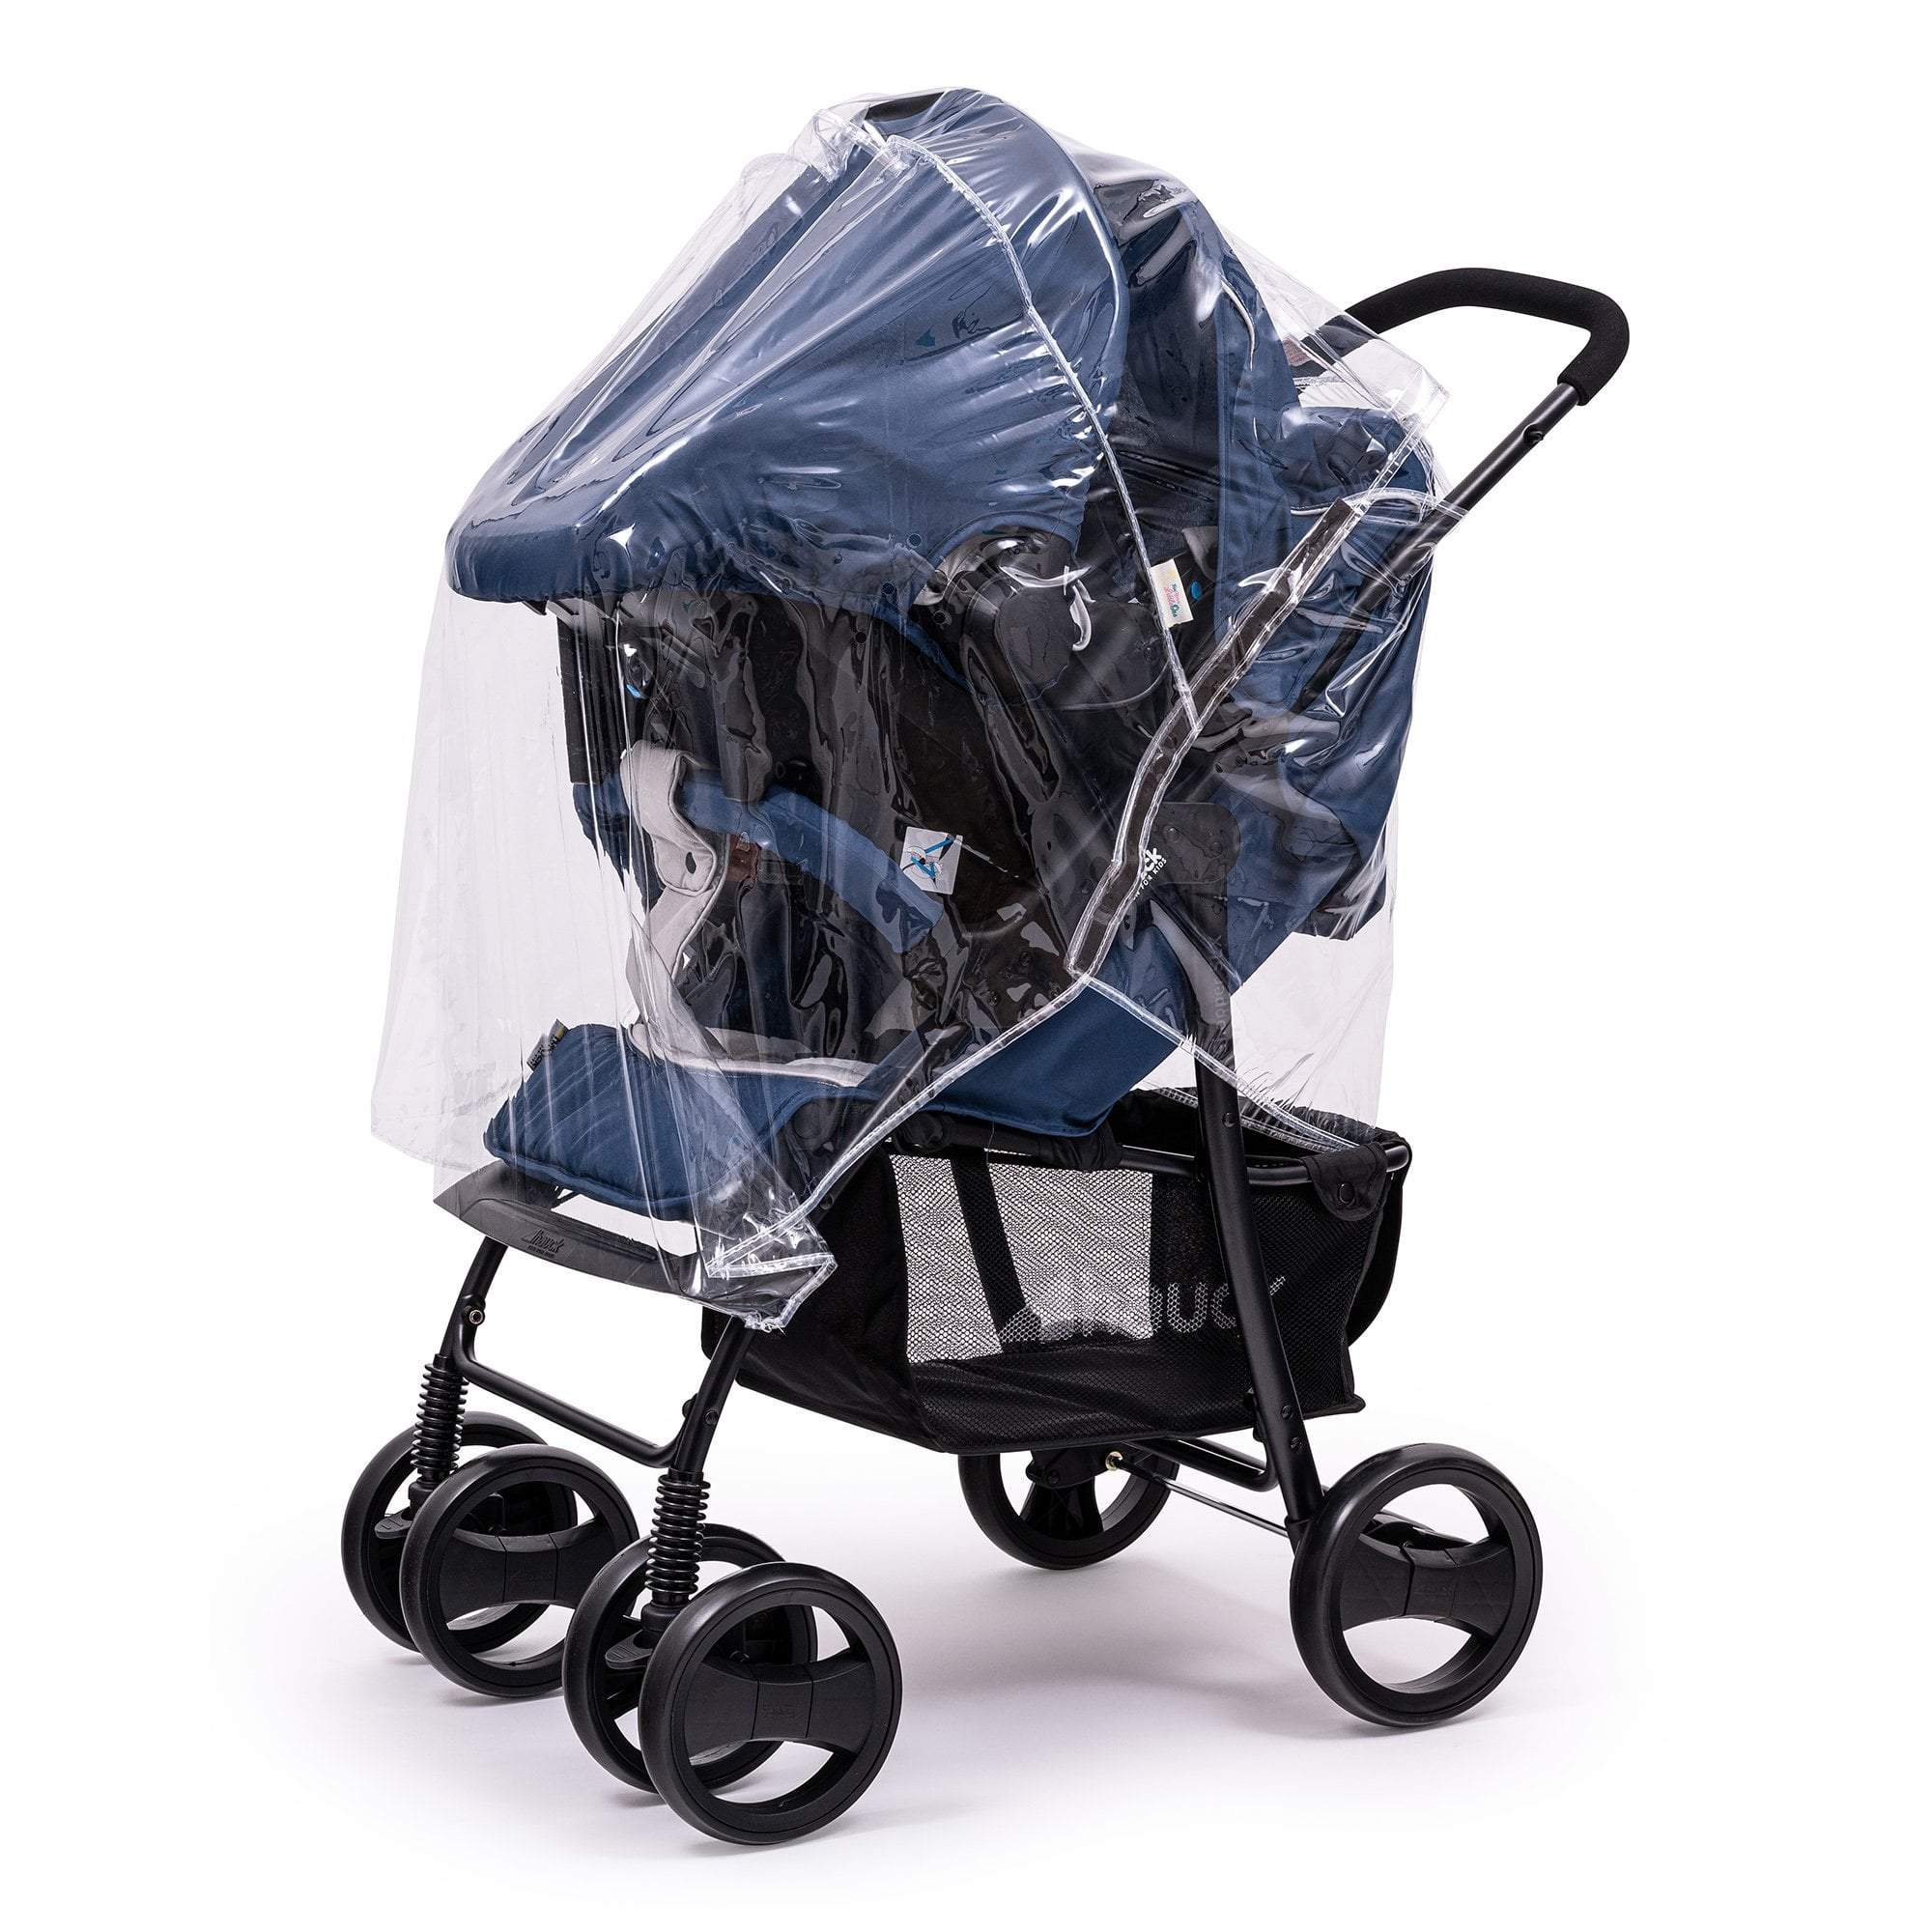 Travel System Raincover Compatible with Valco - Fits All Models - For Your Little One